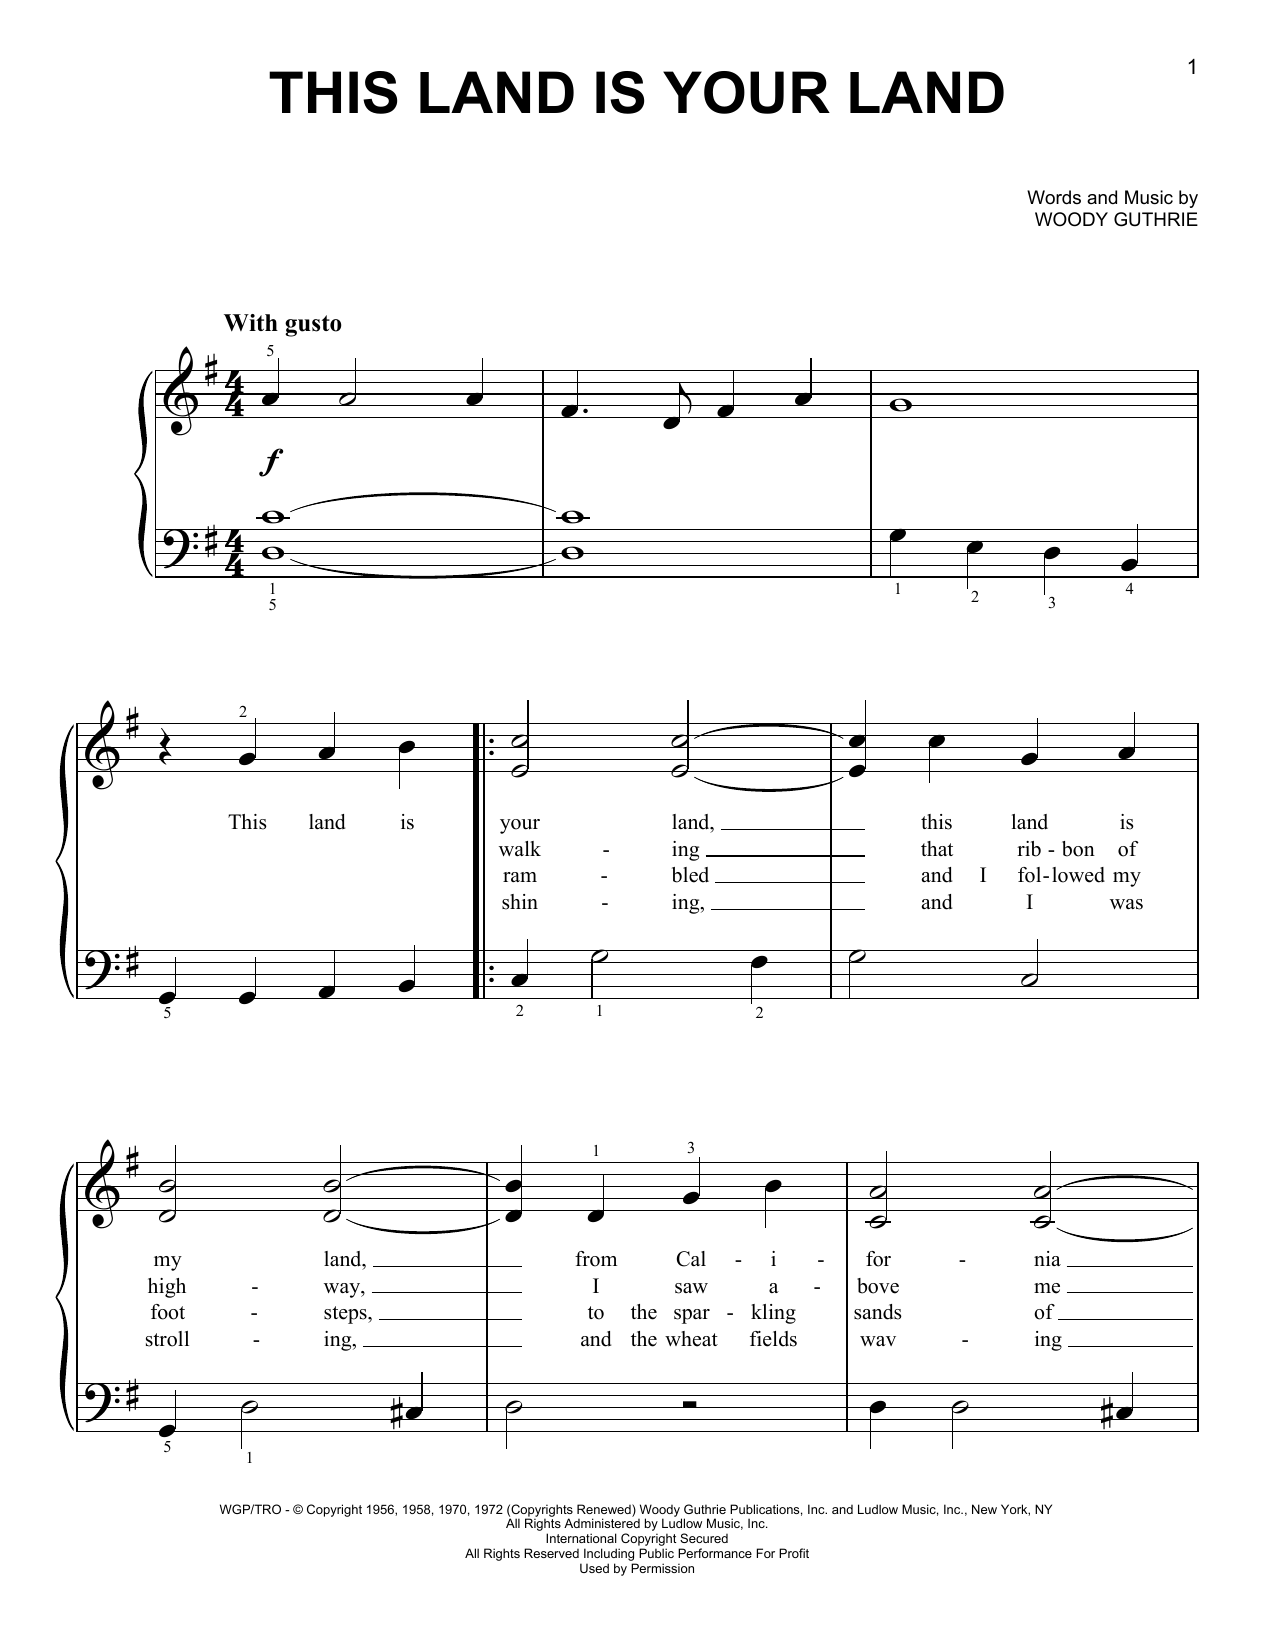 Download Woody Guthrie This Land Is Your Land Sheet Music